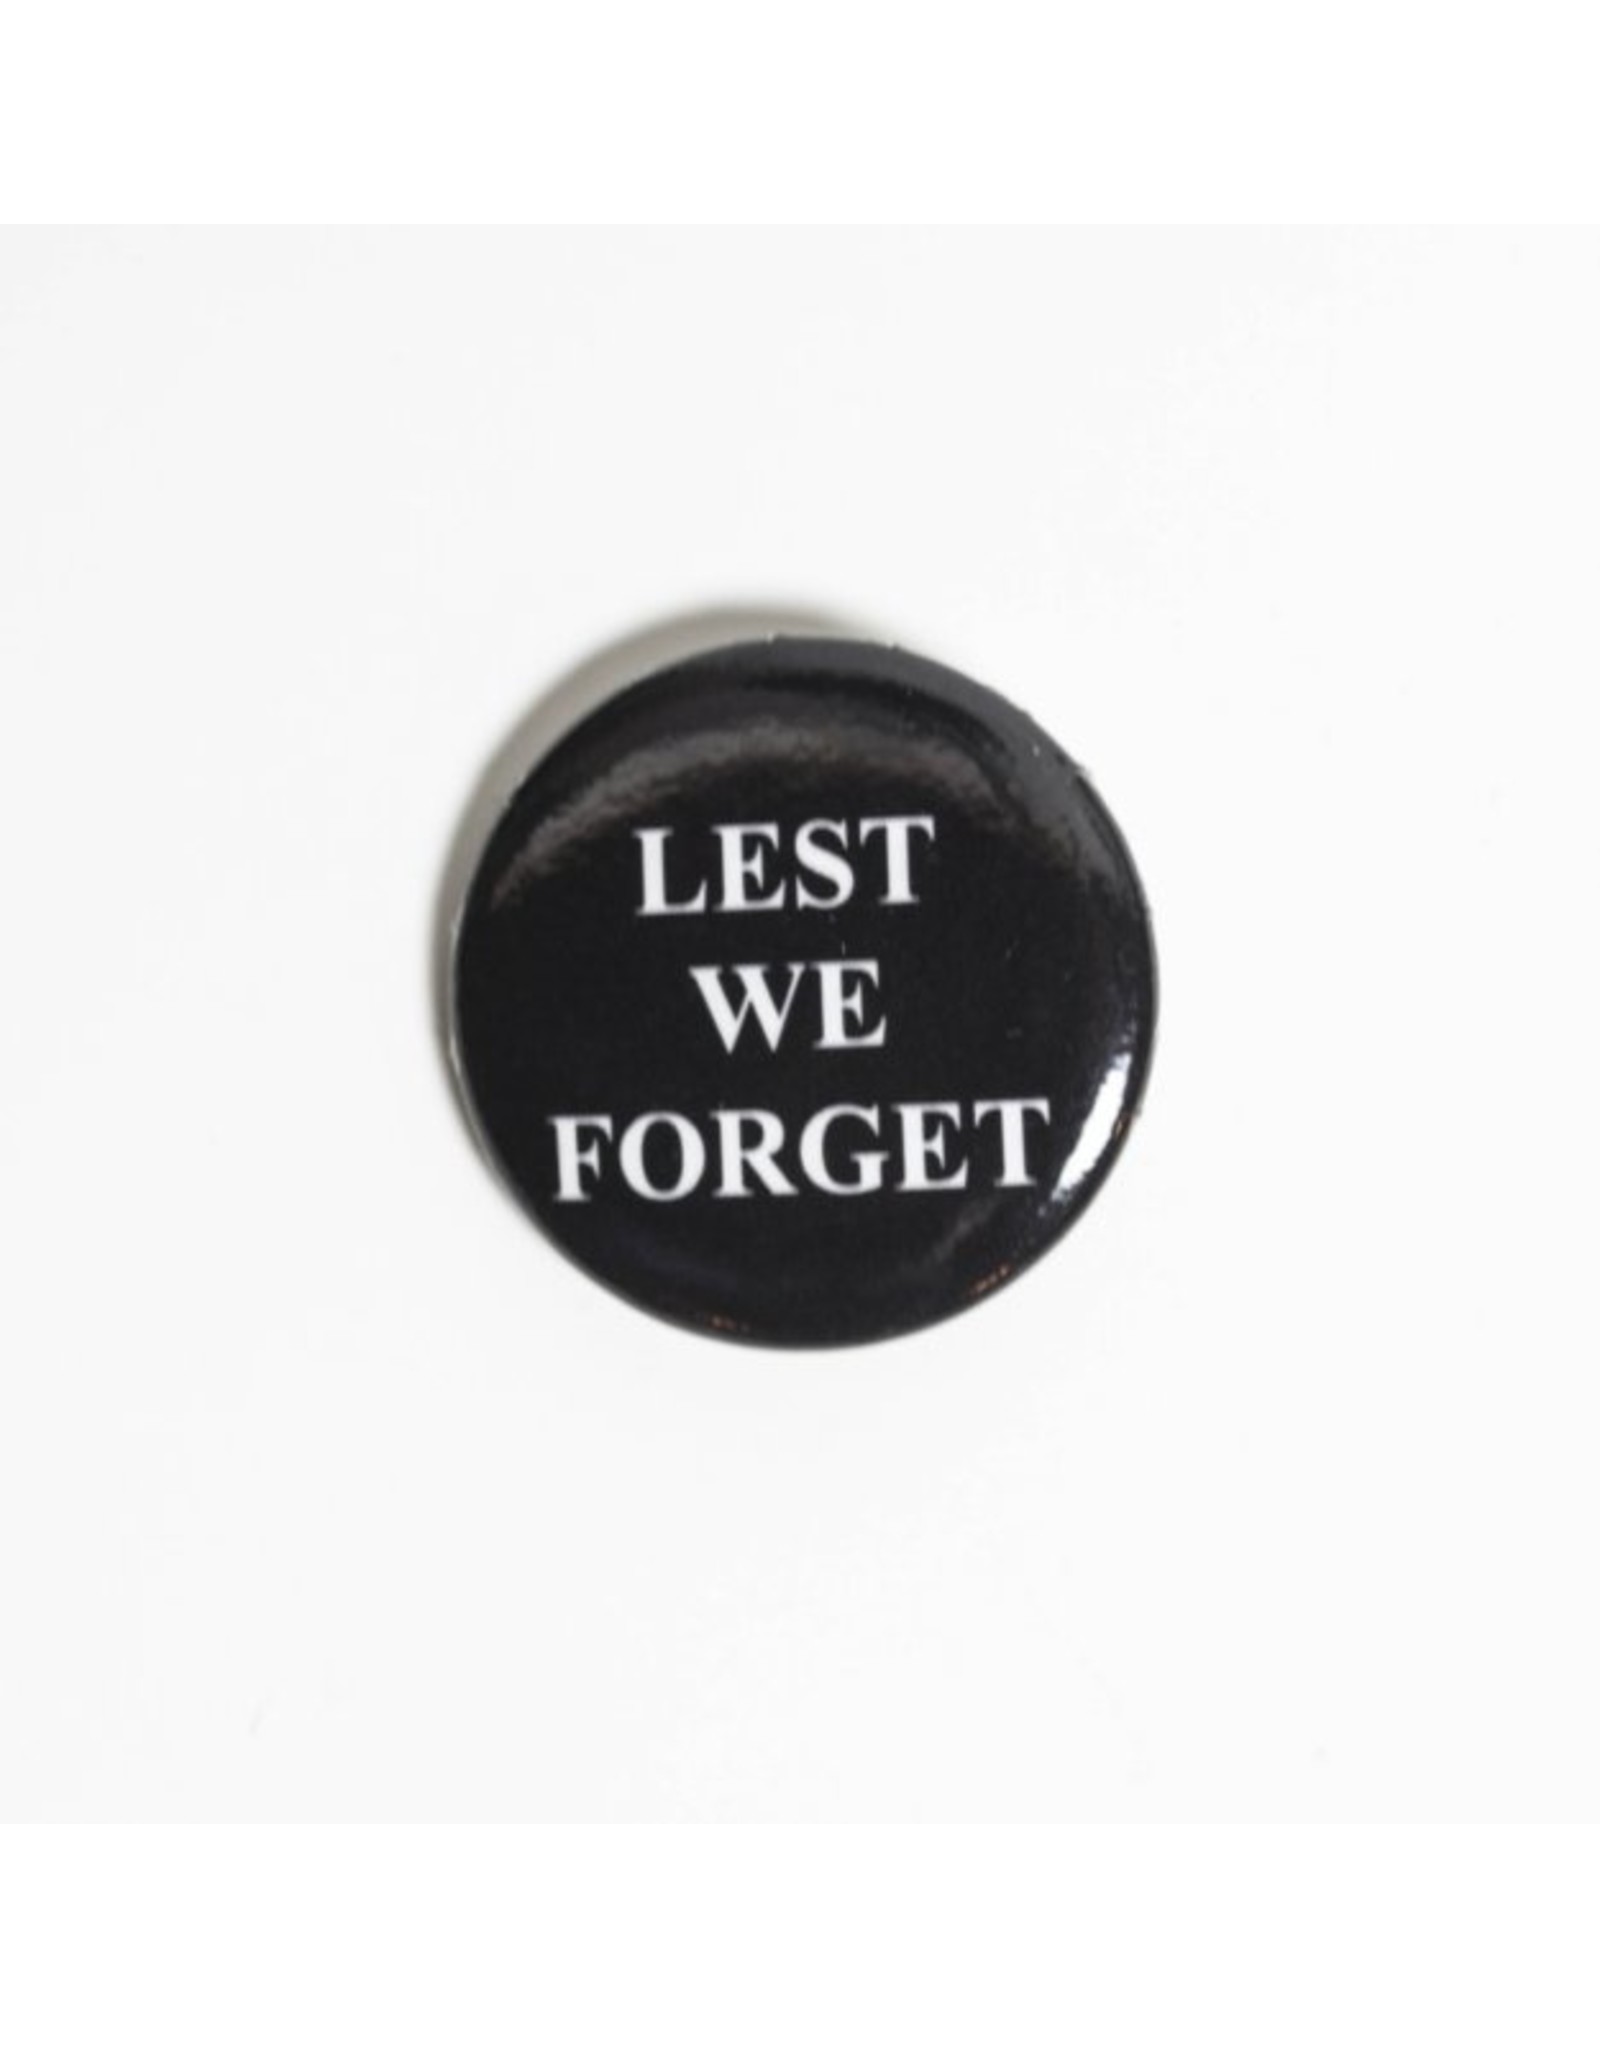 Whitney Button Lest We Forget